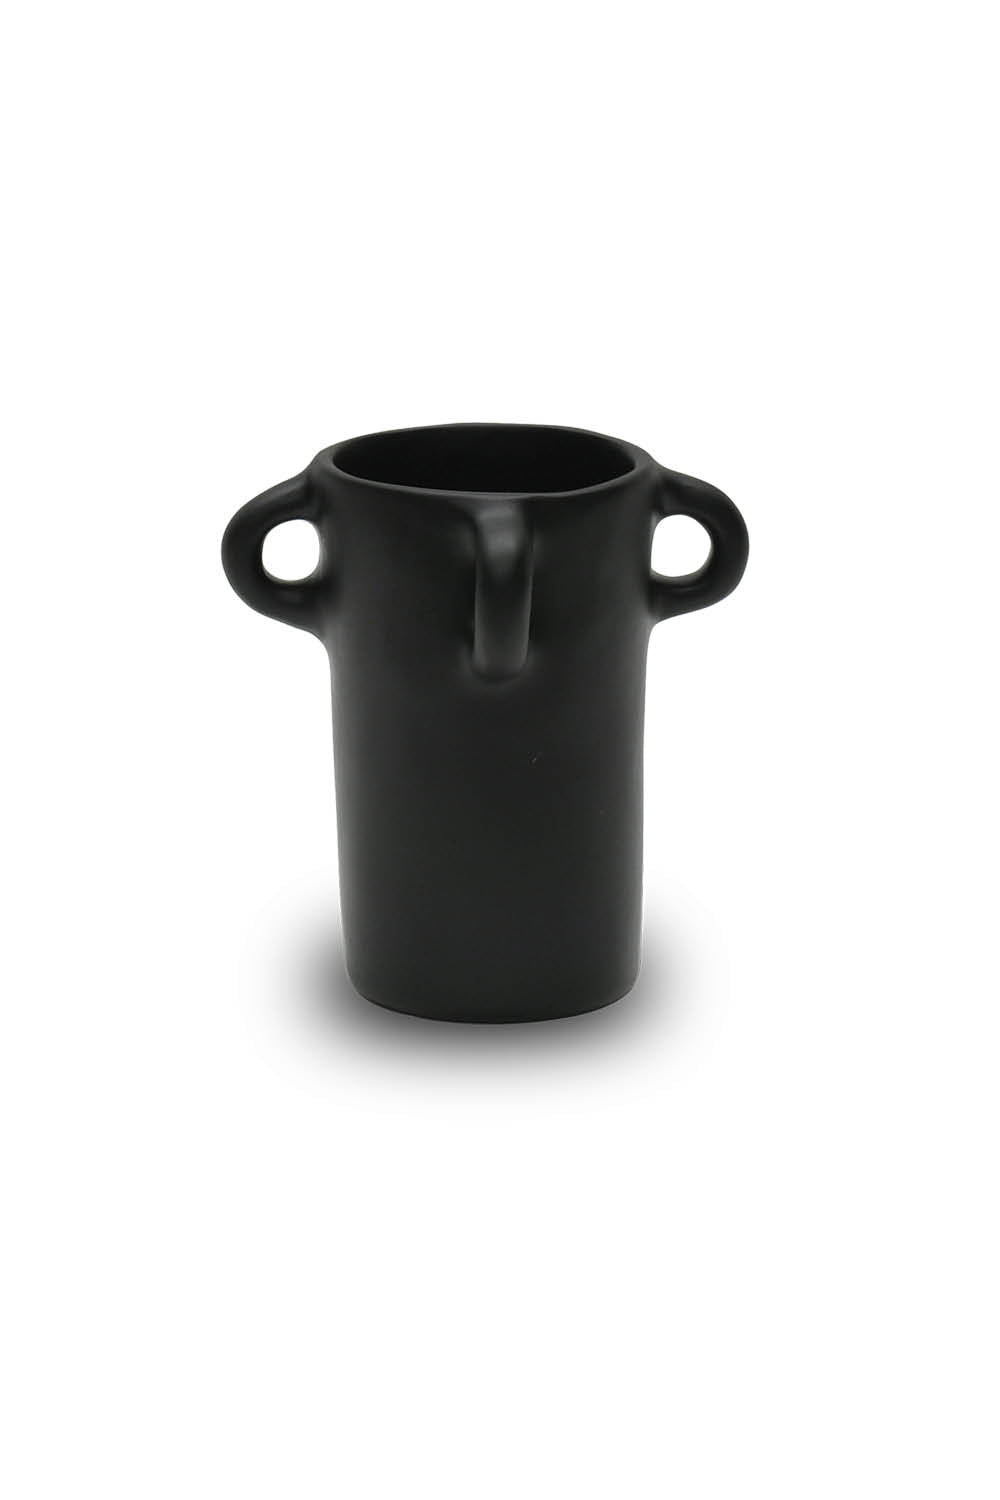 LOOPY Small Vase in Black